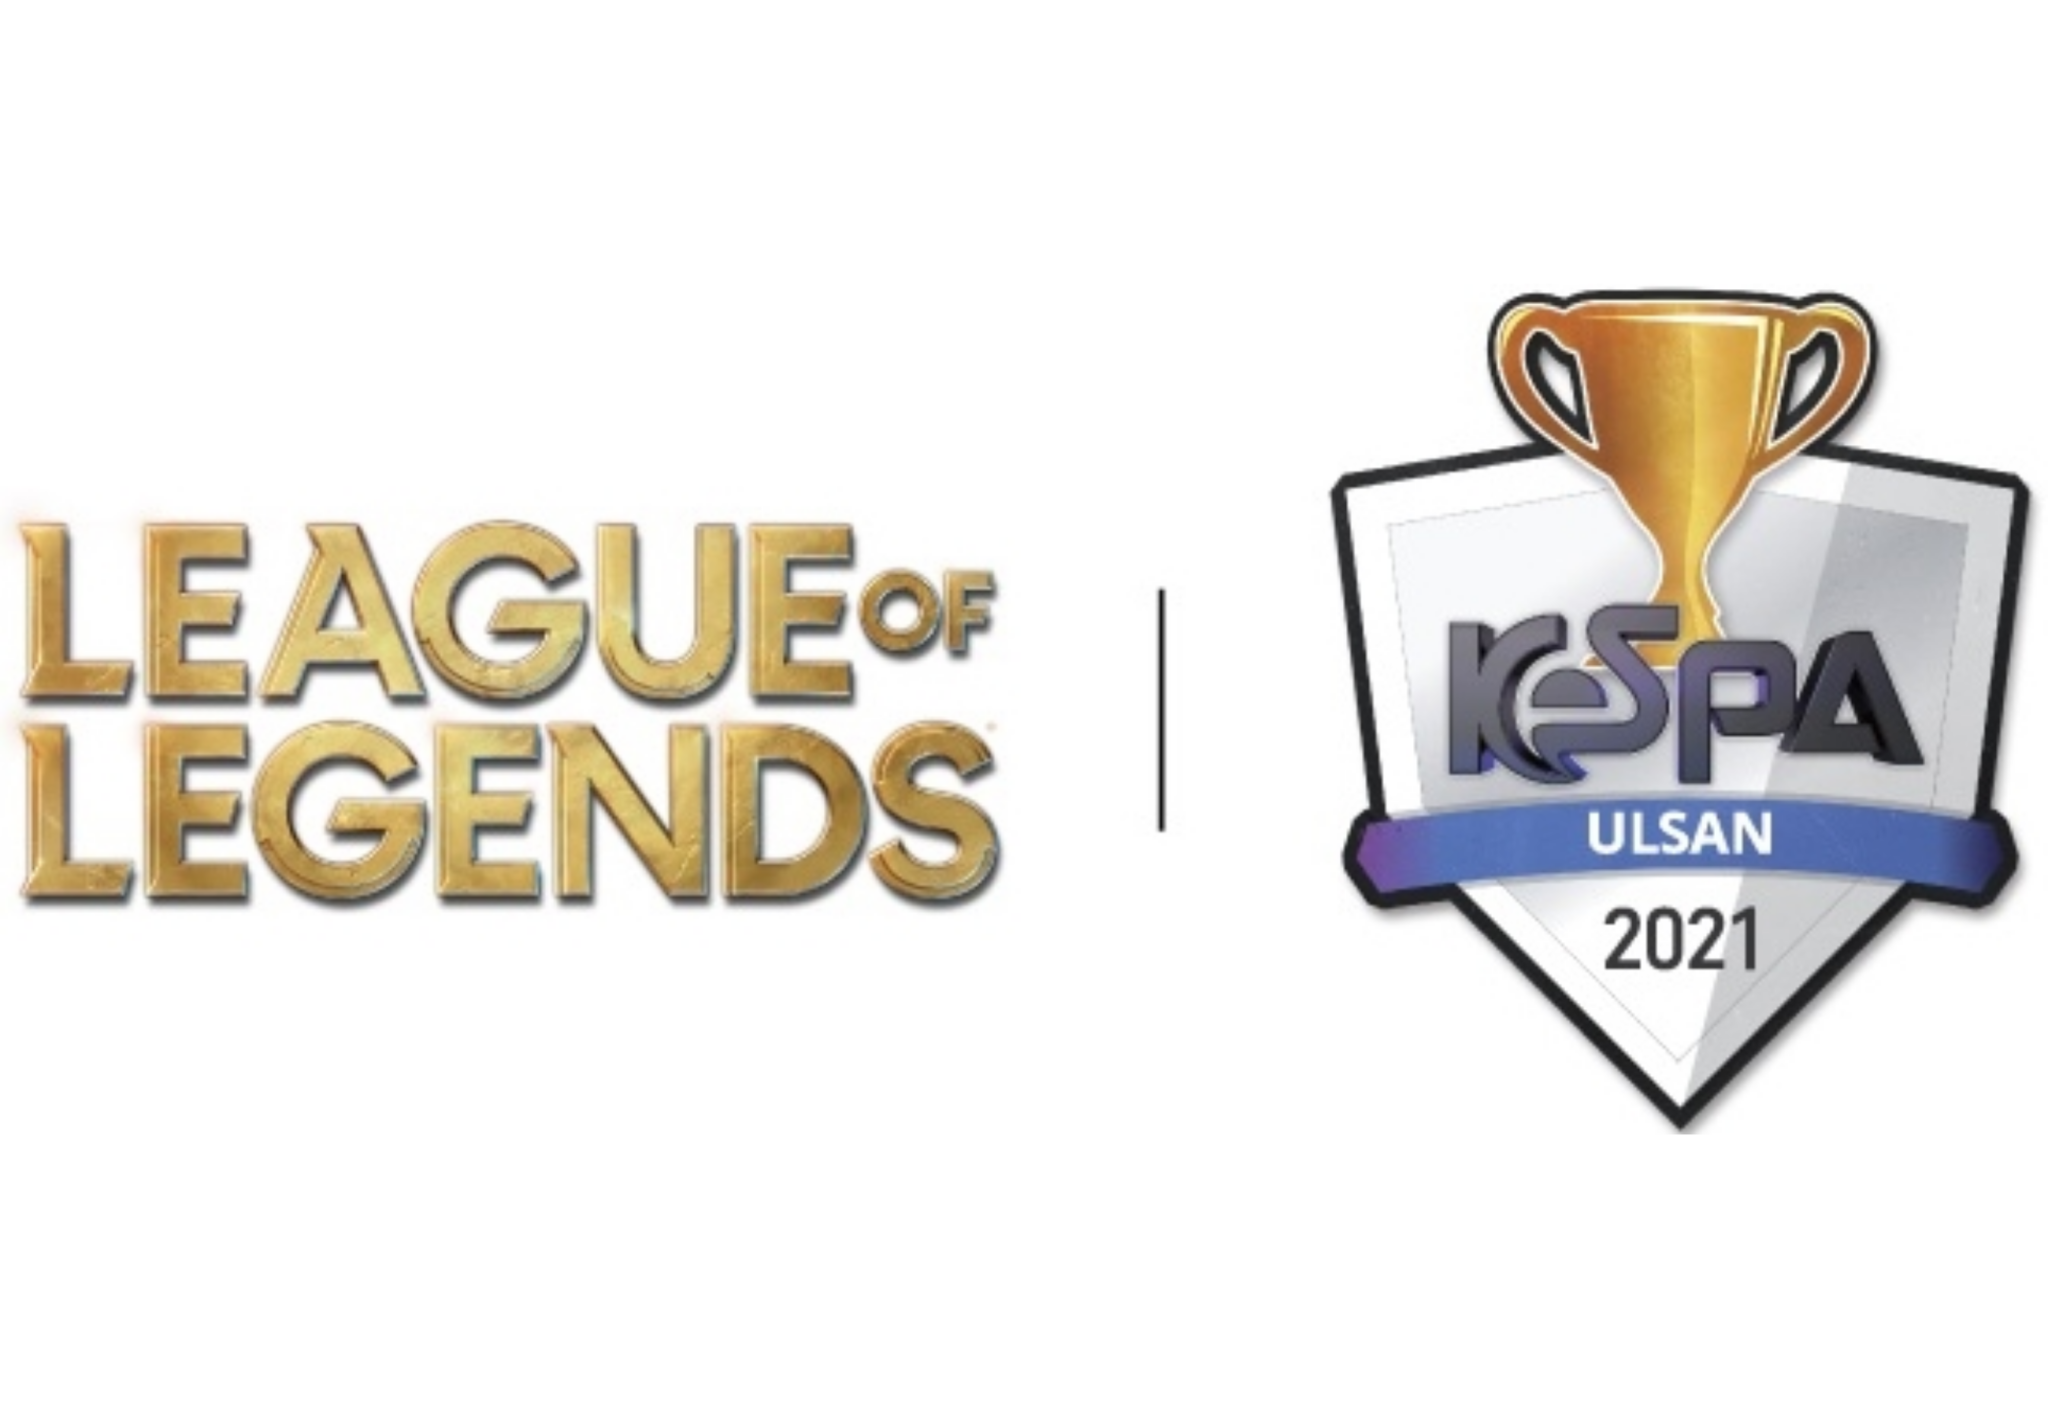 KeSPA Cup 2021 returns to offline setting, will feature more than just